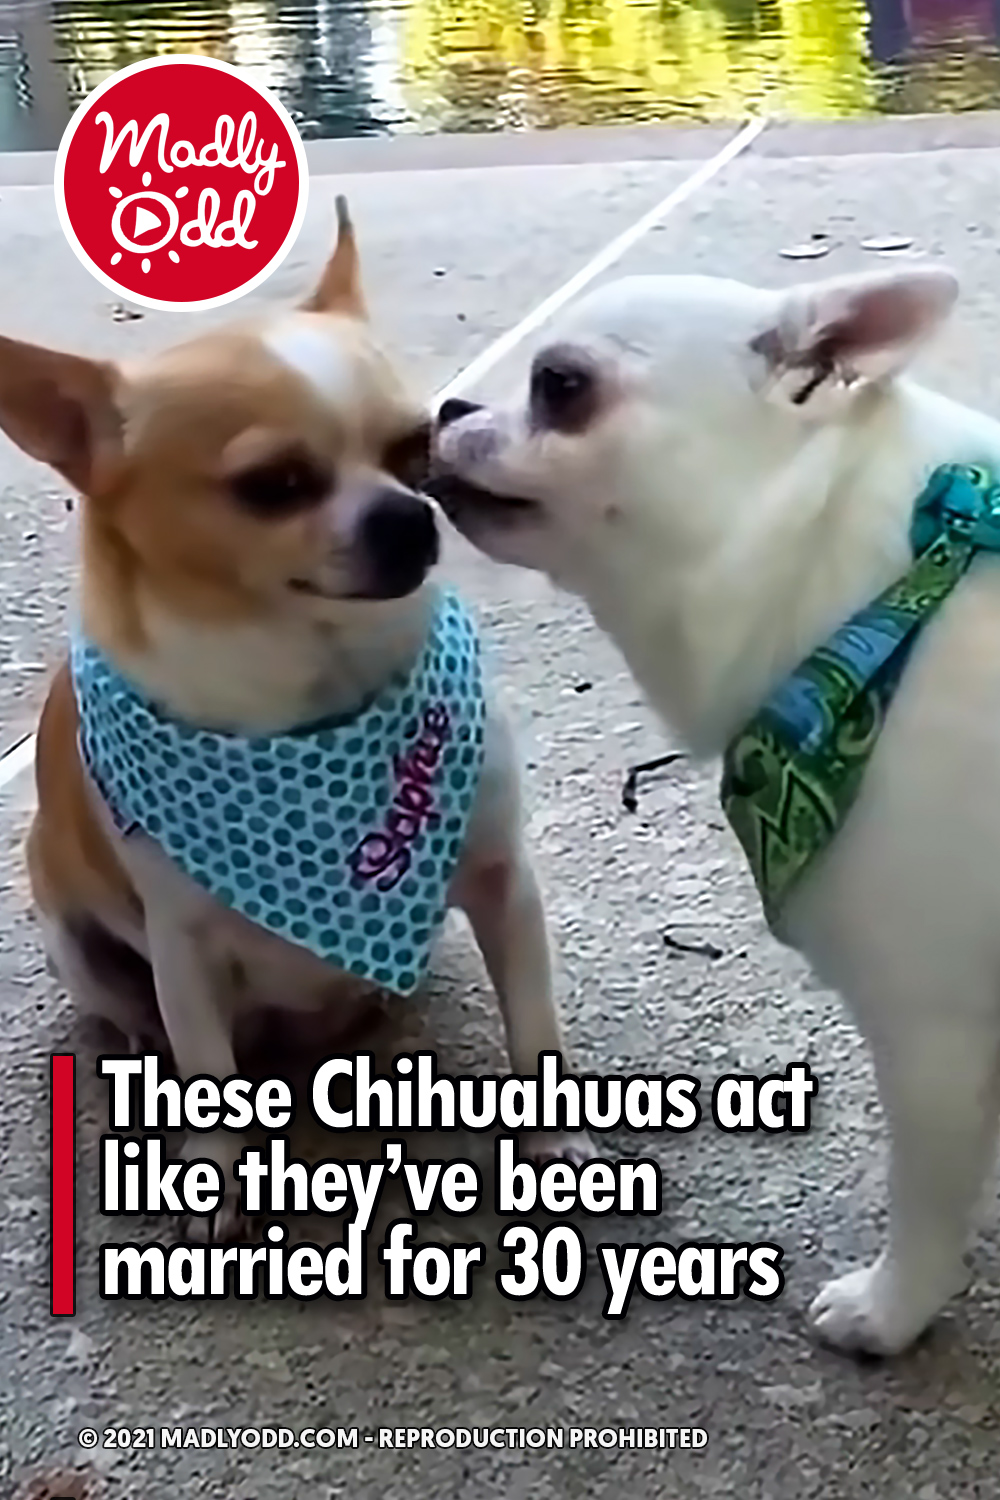 These Chihuahuas act like they’ve been married for 30 years